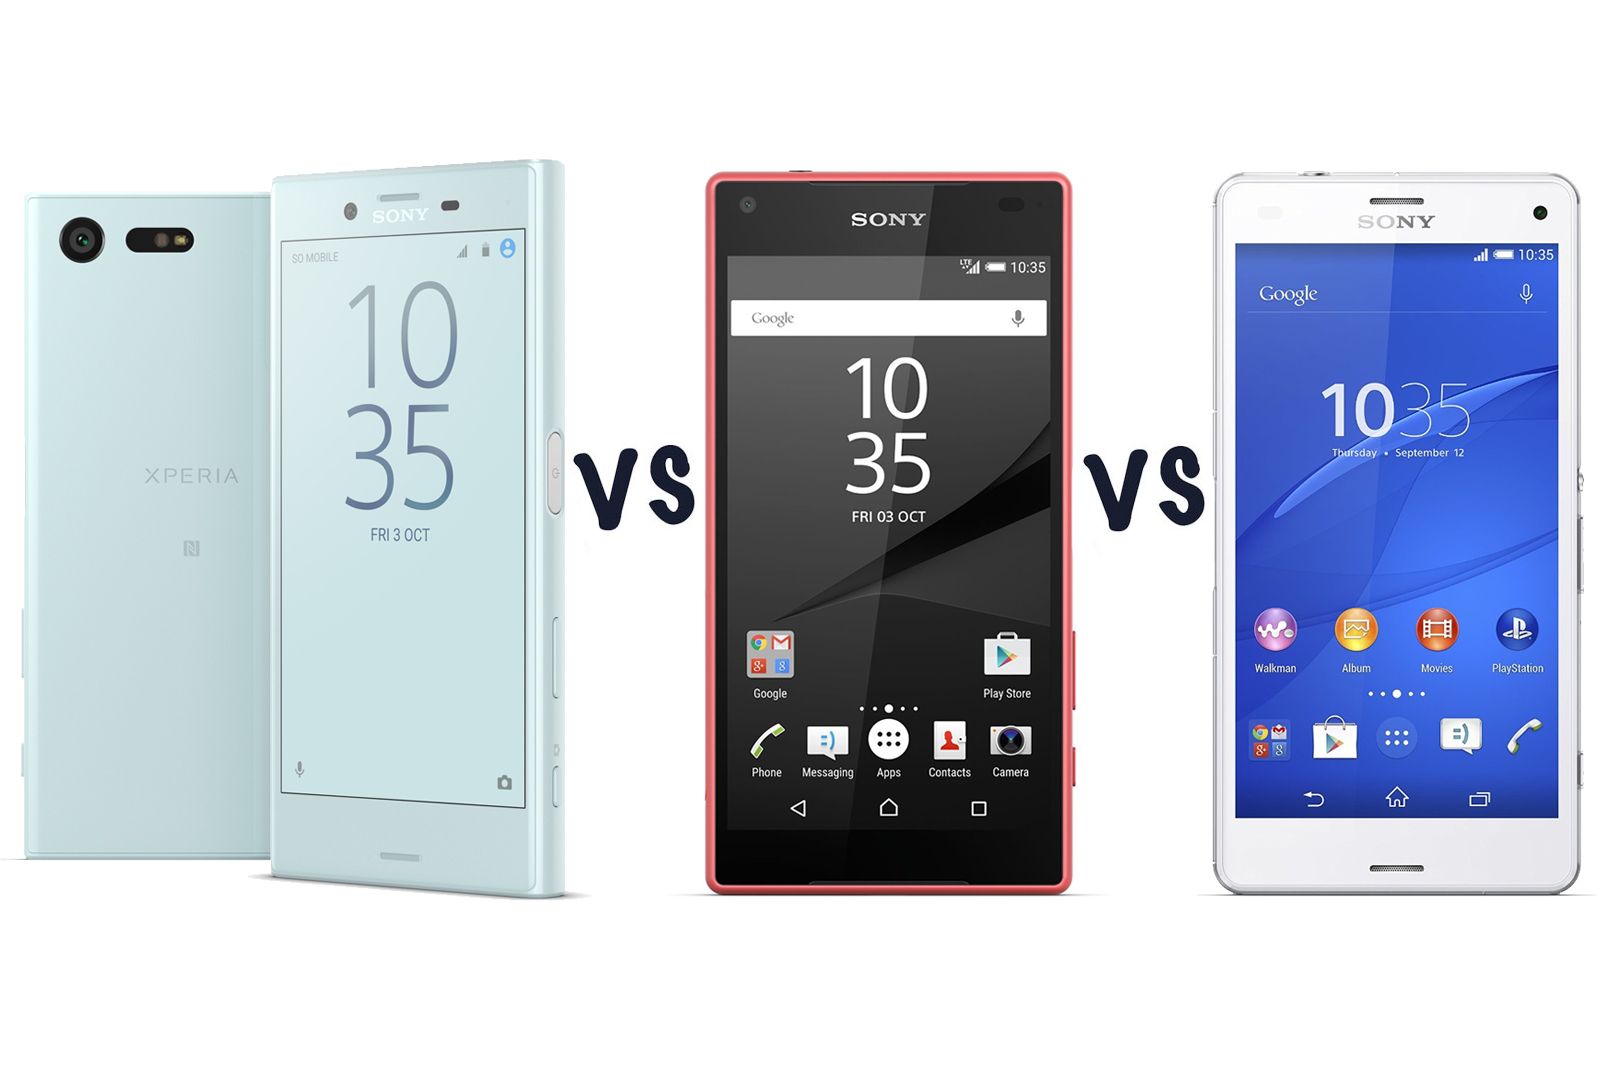 sony xperia x compact vs z5 compact vs z3 compact what’s the difference  image 1